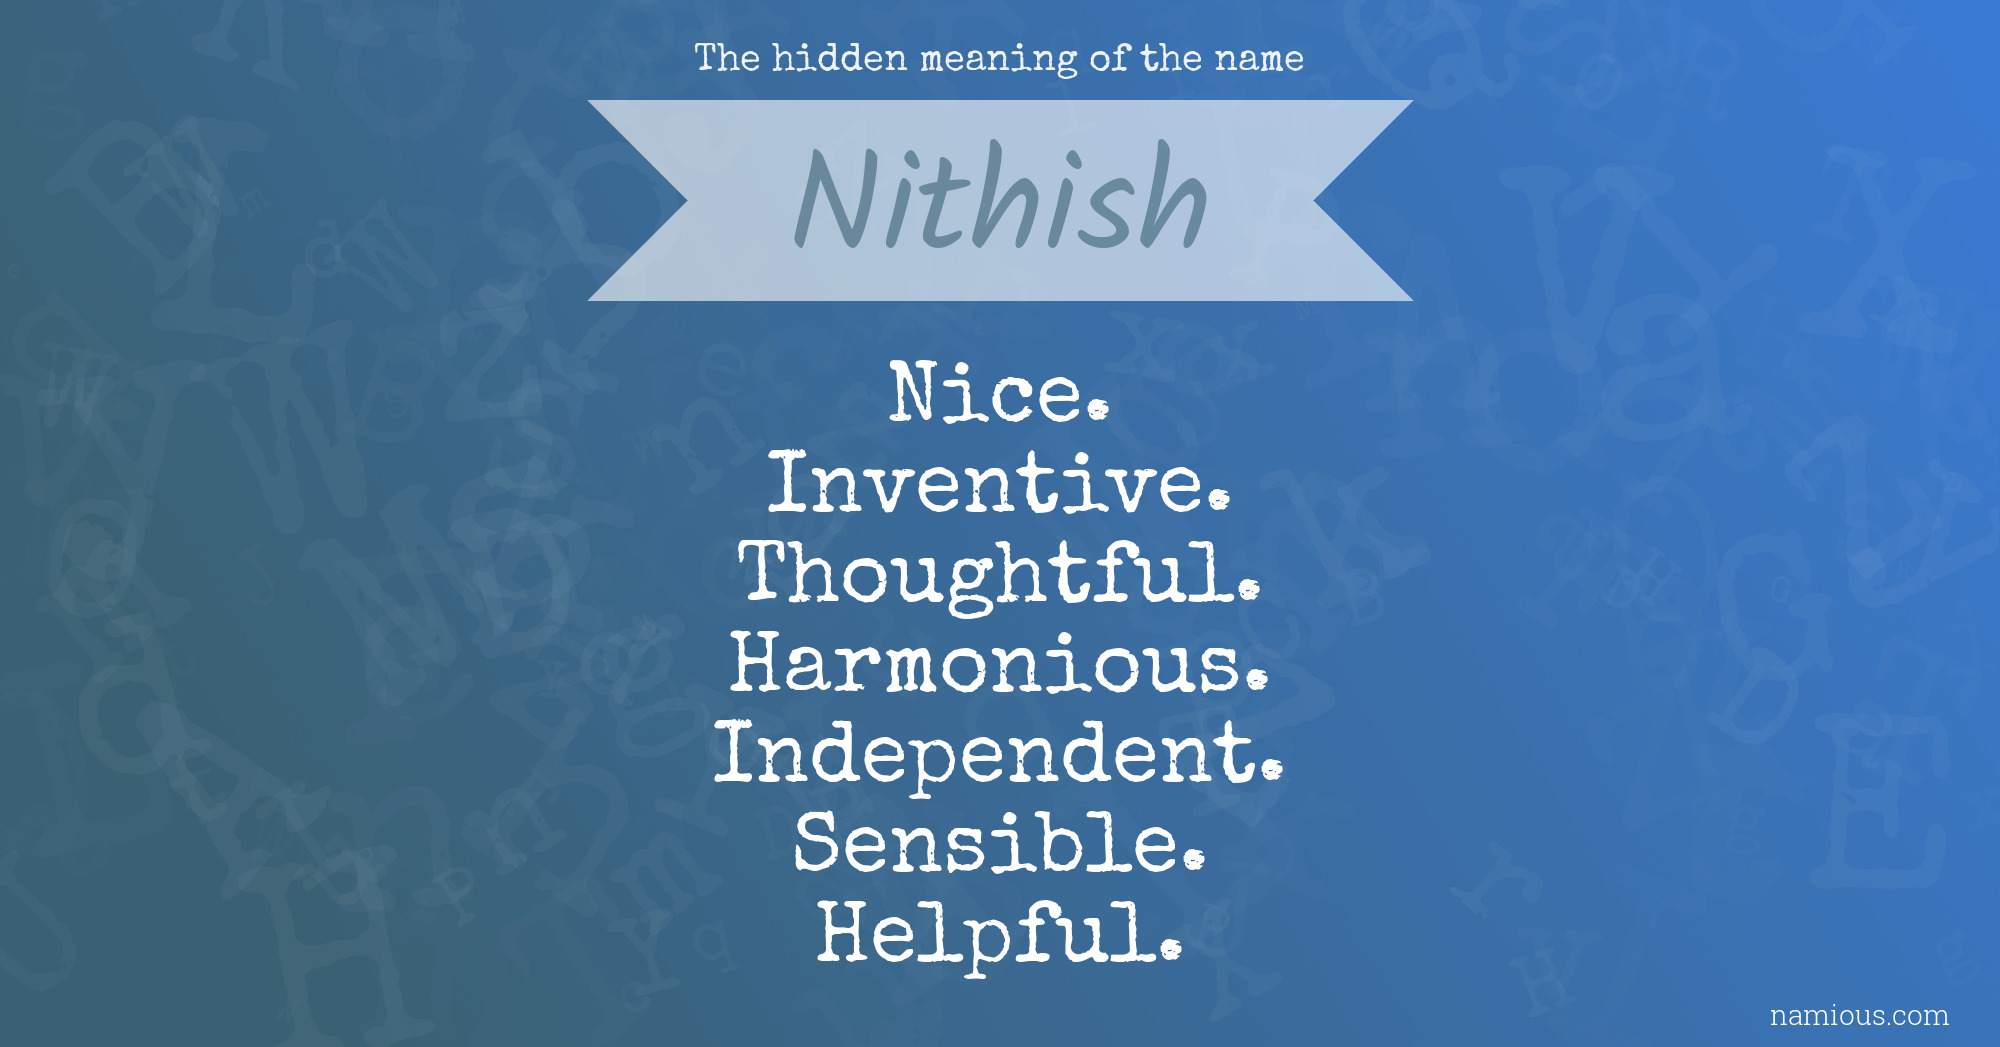 The hidden meaning of the name Nithish